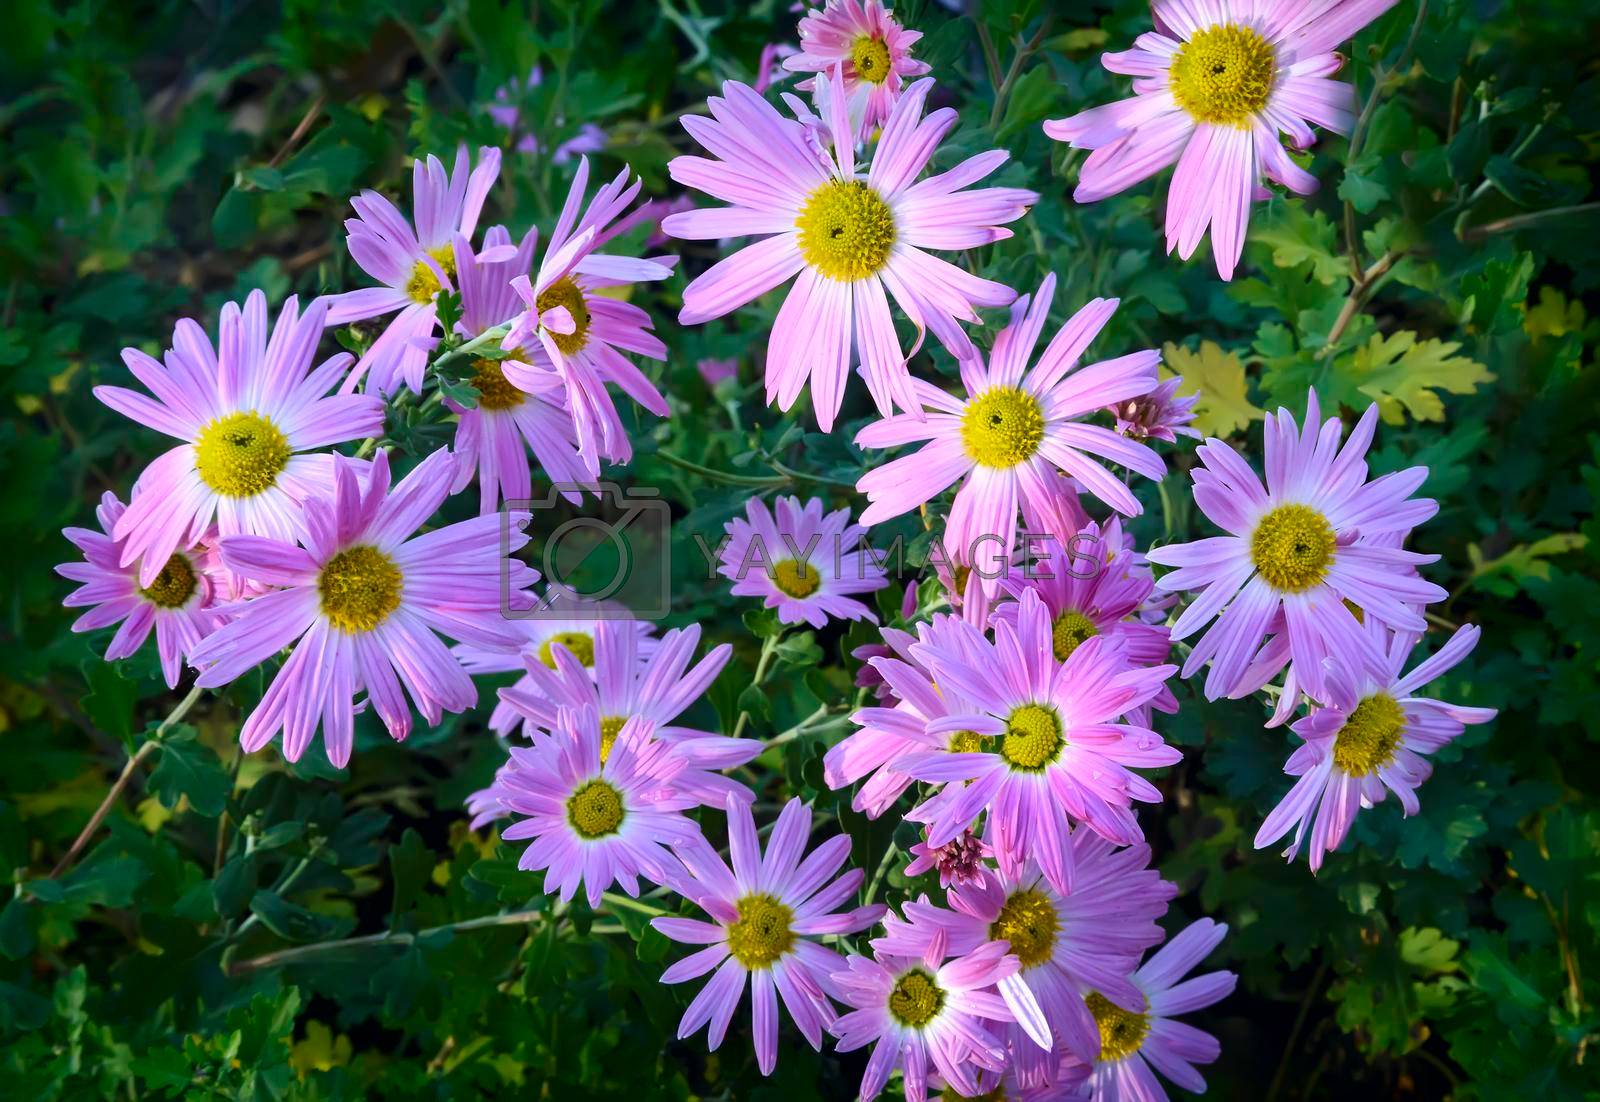 Royalty free image of Beautiful lilac chrysanthemums blooming in the garden by georgina198